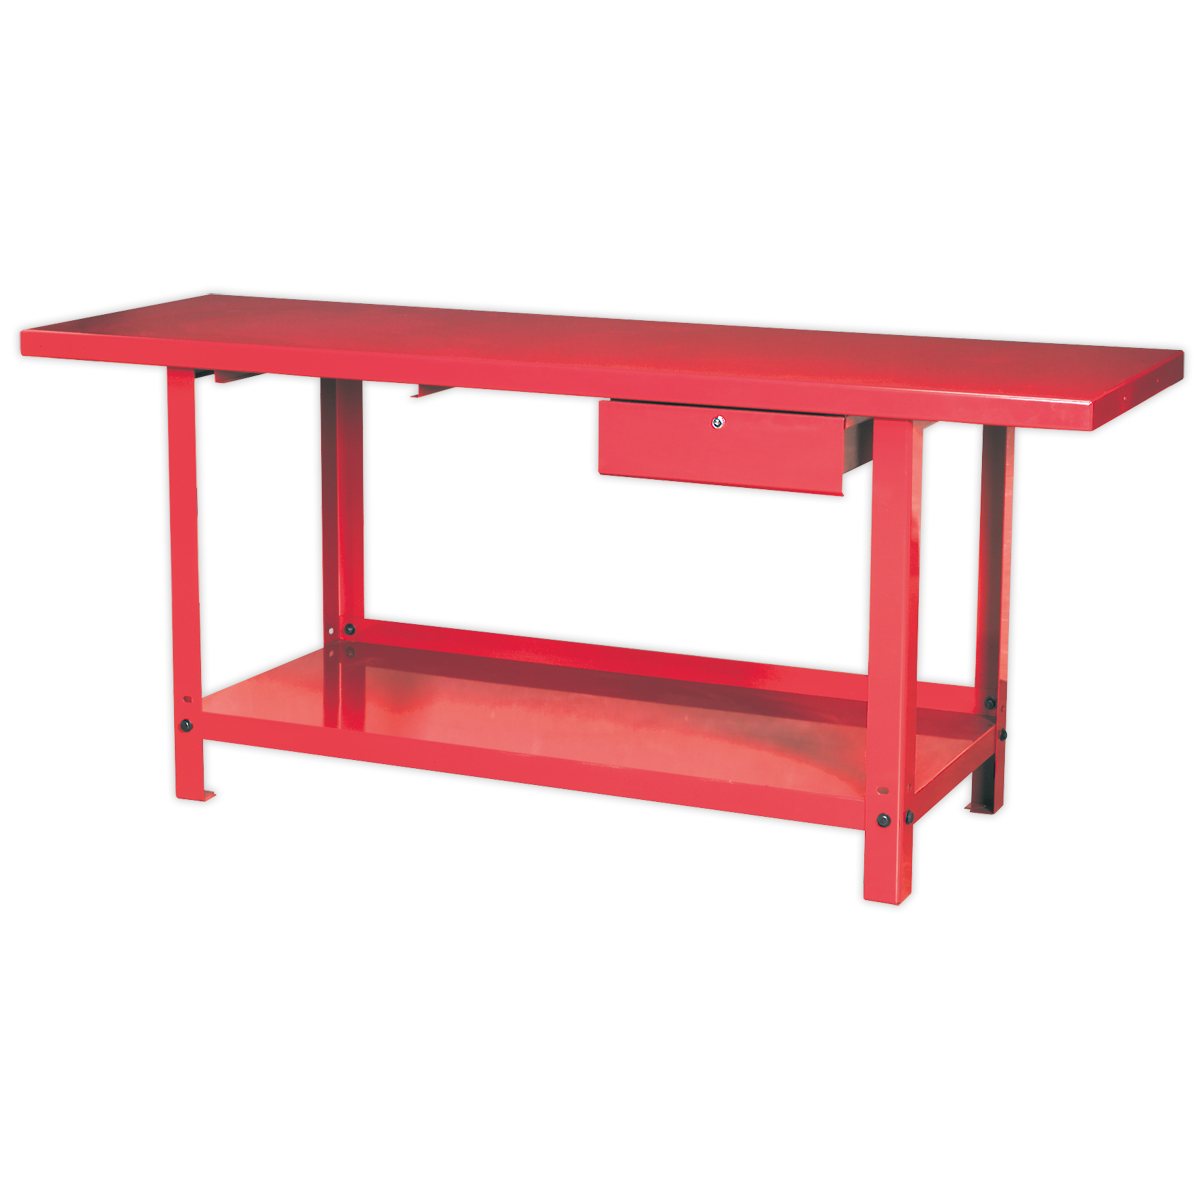 Workbench Steel 2m with 1 Drawer - AP3020 - Farming Parts